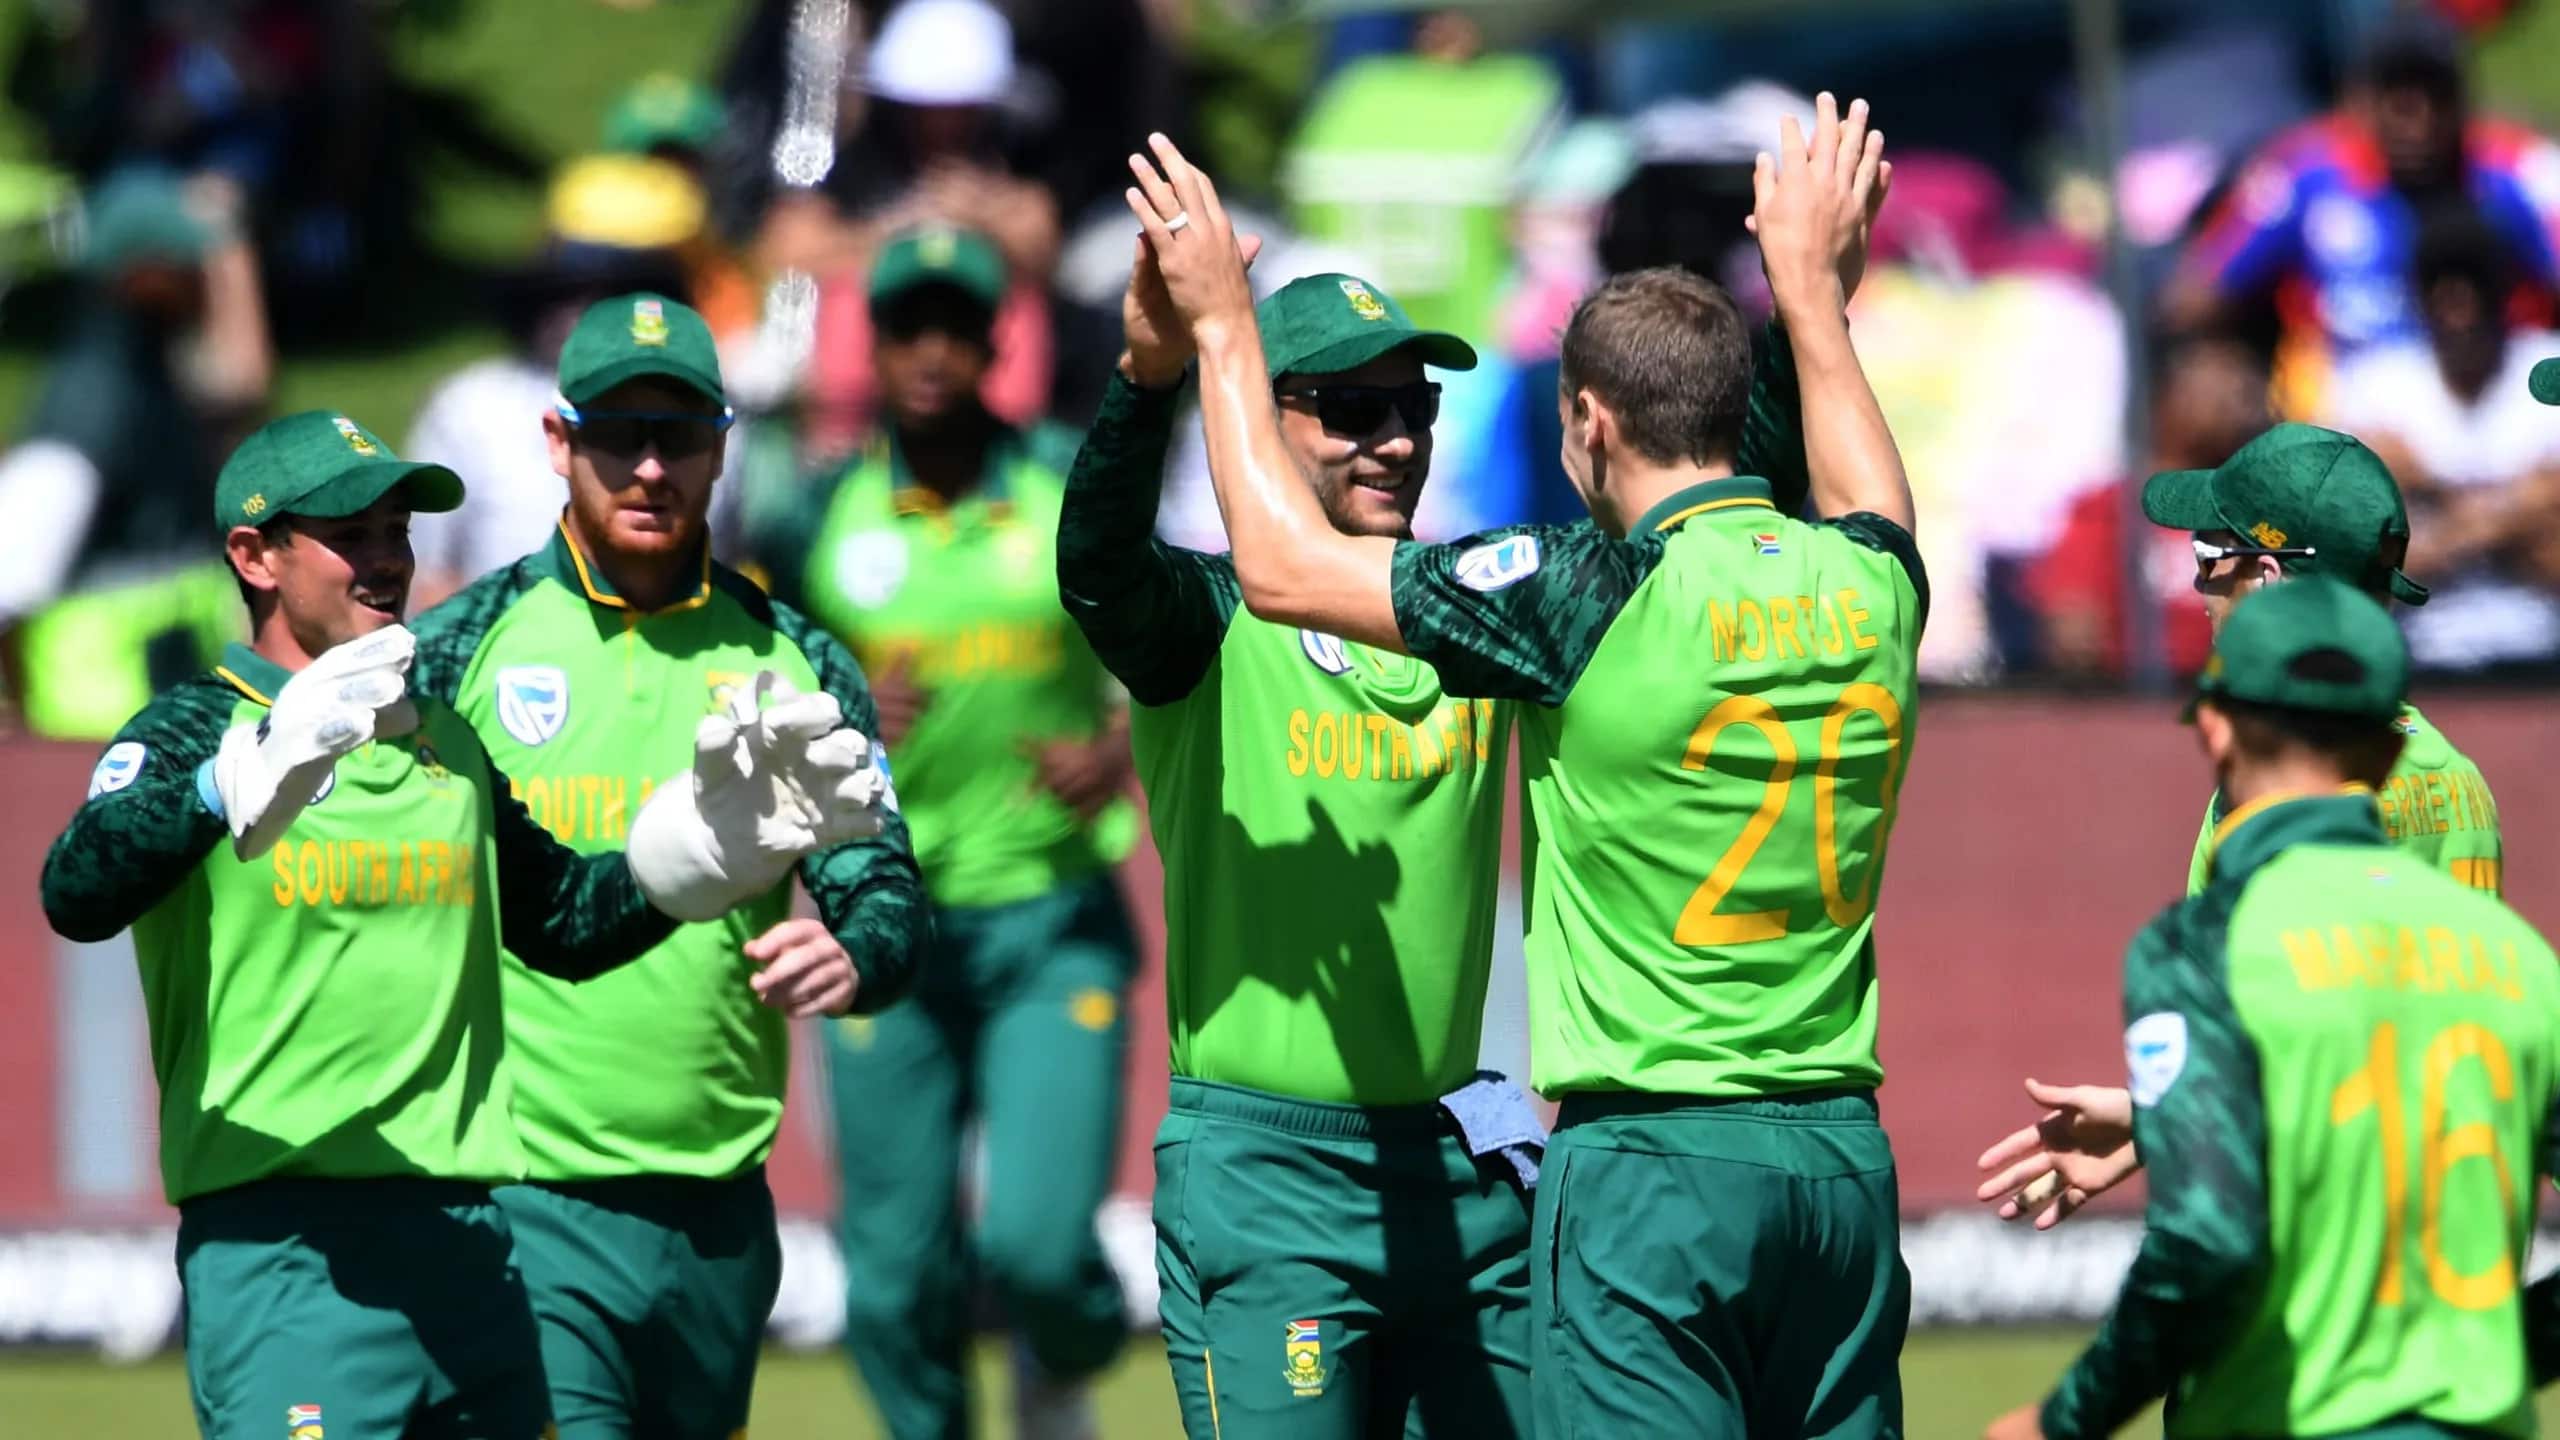 After World Cup, South Africa announces squad for ODI series against India